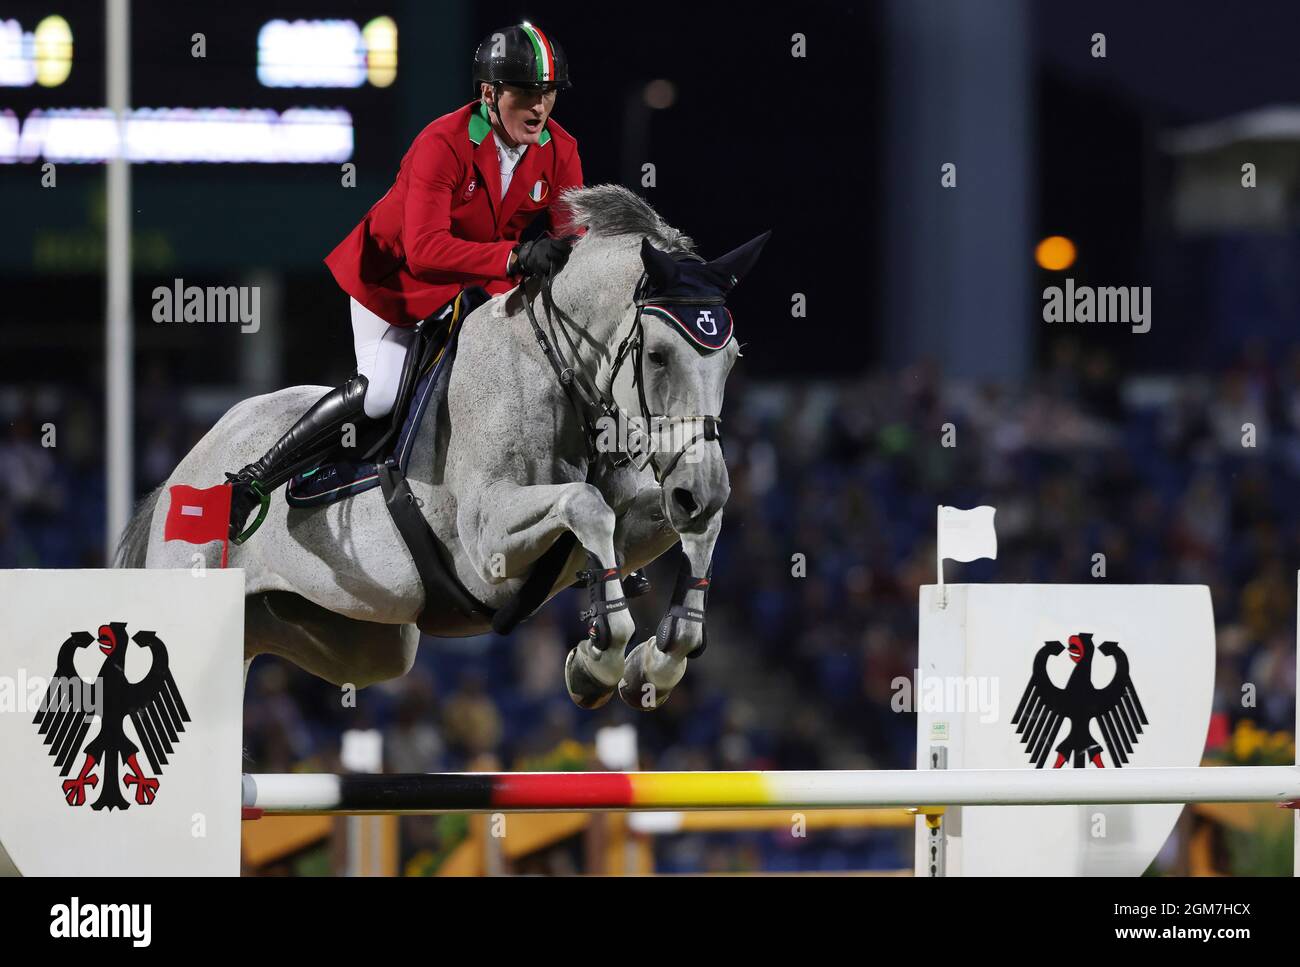 City Aachen, Deutschland. 16th Sep, 2021. firo: 16.09.2021, equestrian sport, Aachener Soers horse show, CHIO 2021, show jumping, Mercedes-Benz Nations Cup, Fabio BROTTO, Italy, on VANITA DELLE ROANE/dpa/Alamy Live News Stock Photo